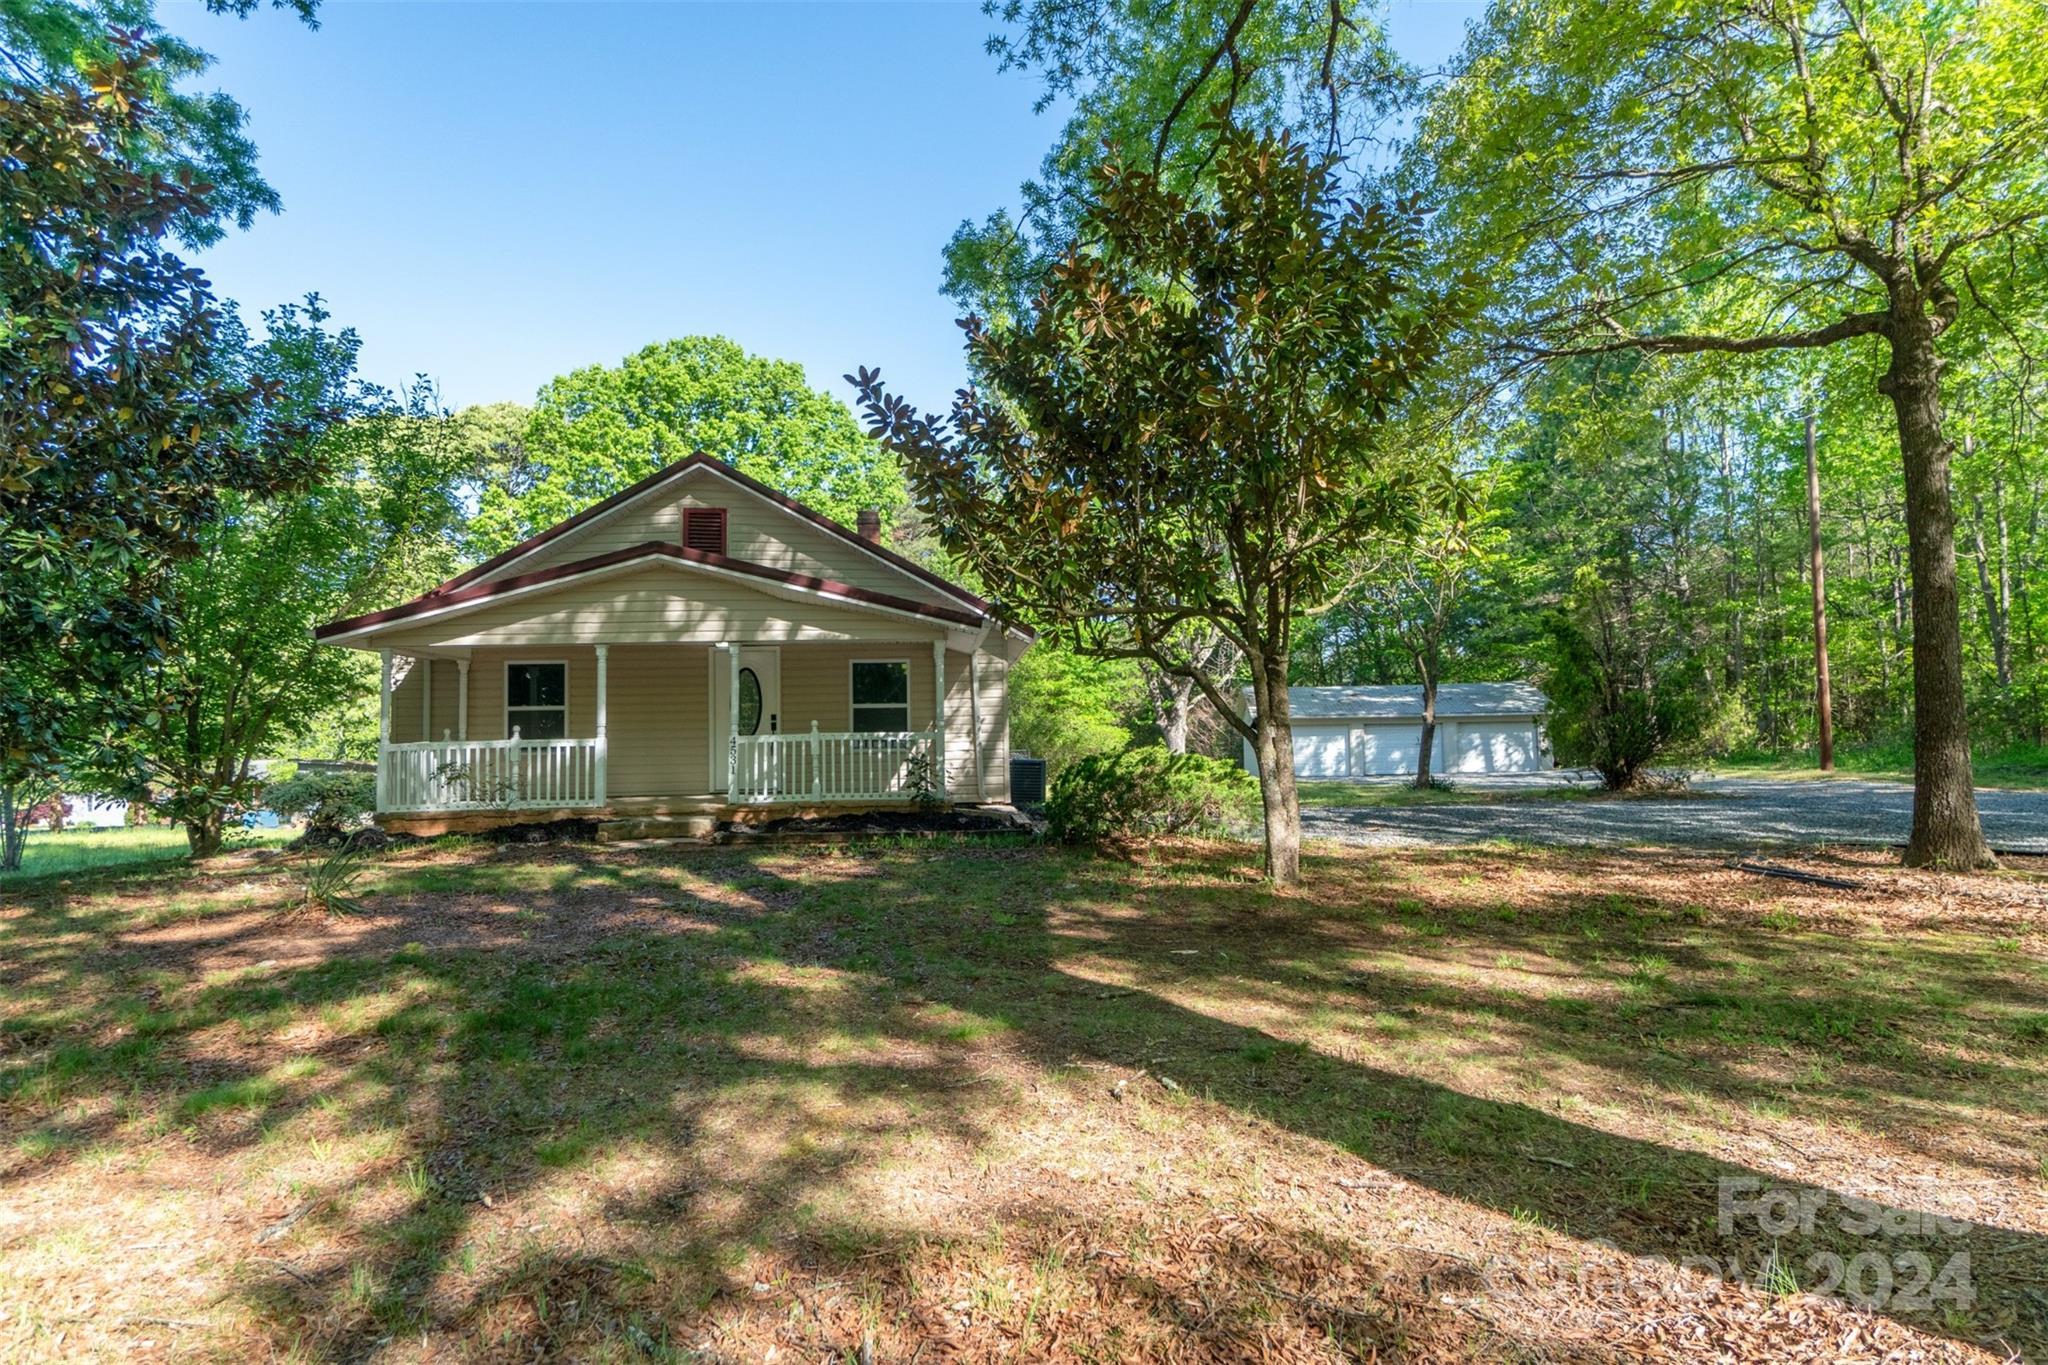 Photo one of 4531 Springs Rd Conover NC 28613 | MLS 4133553